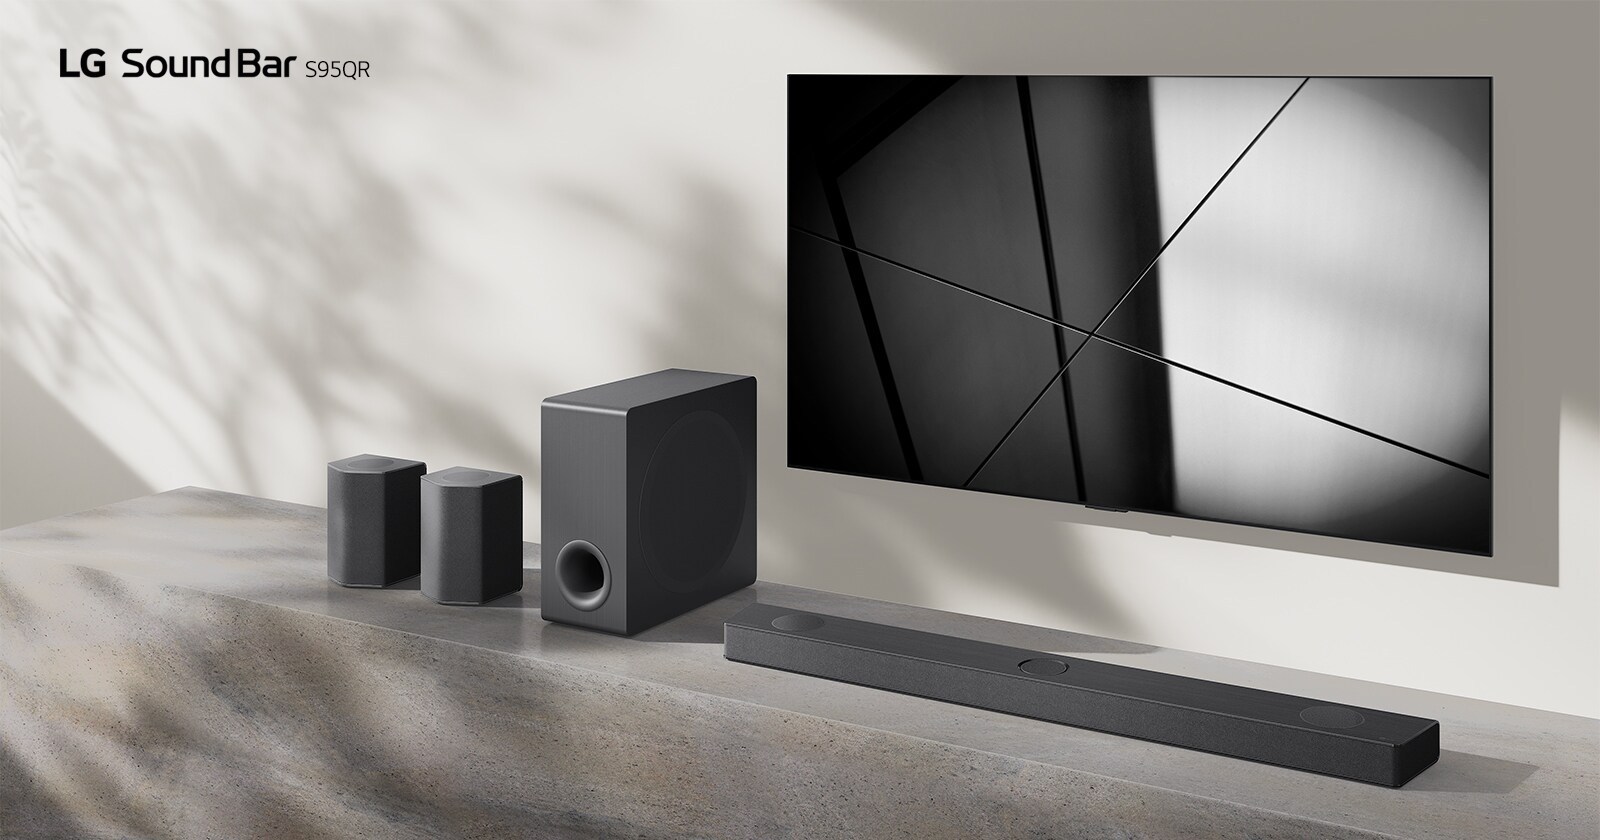 LG sound bar S95QR and LG TV are placed together in the living room. The TV is on, displaying a black and white image.